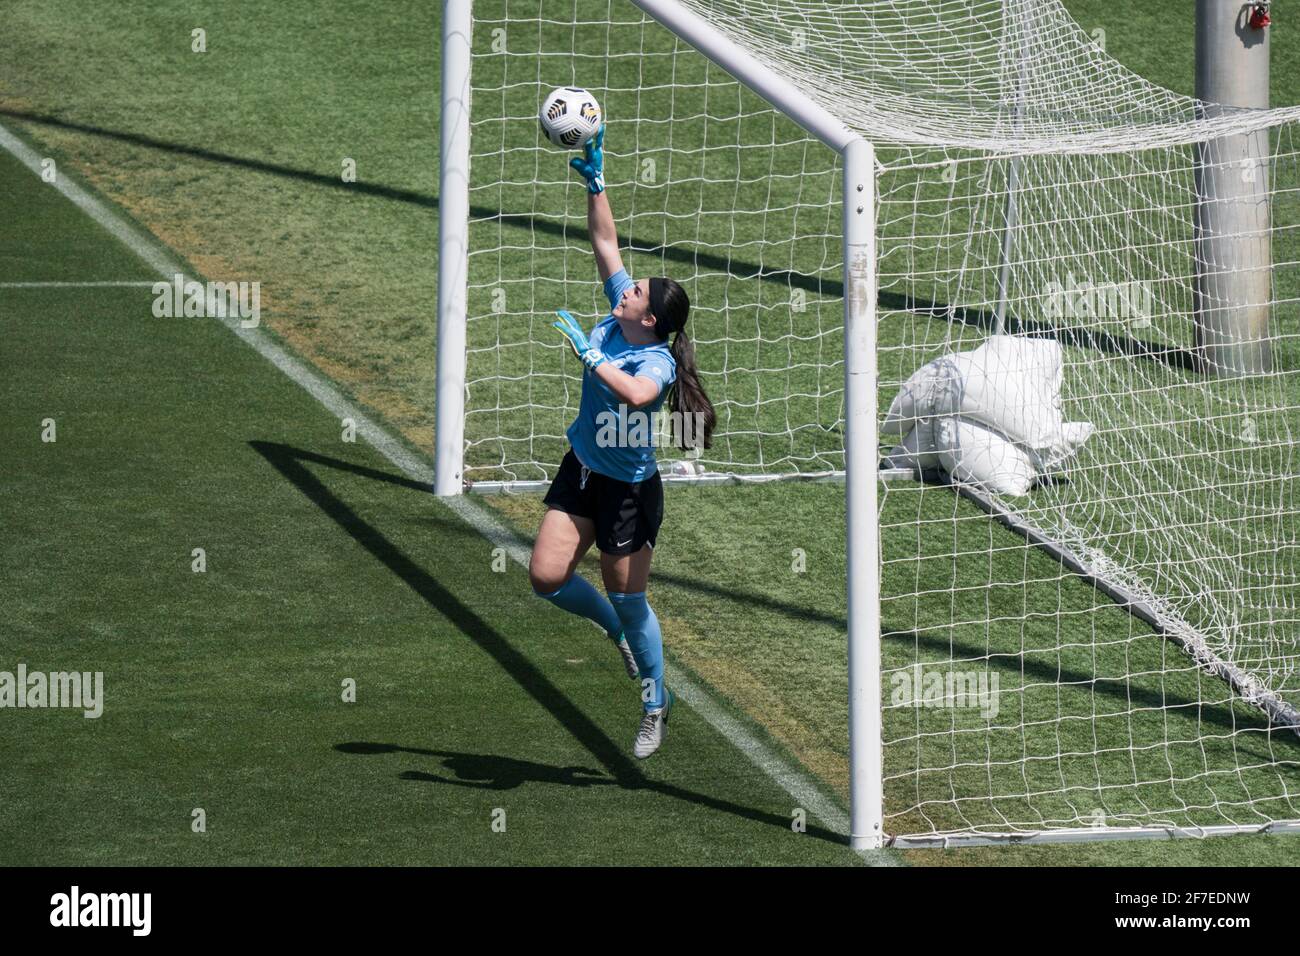 Washington State Cougars goalkeeper Marissa Zucchetto (0) makes a save during a NCAA women’s soccer match against the USC Trojans, Sunday, April 4, 20 Stock Photo